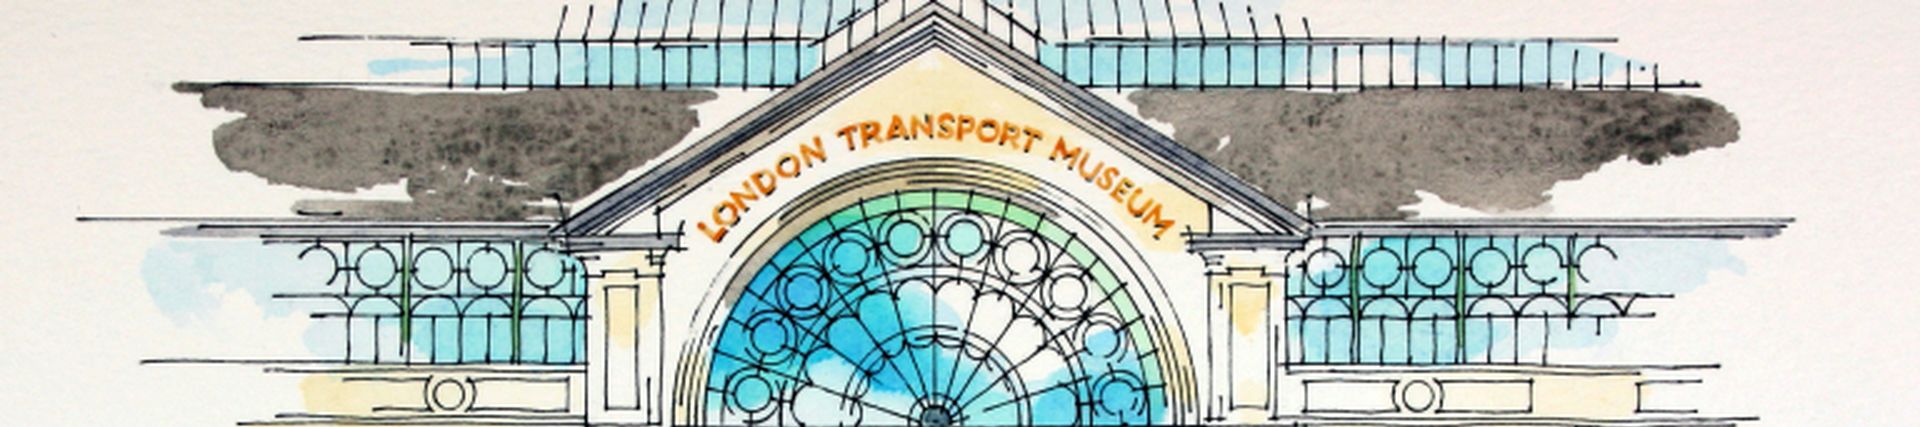 A drawing depicting a Victorian building with arches and large buildings and a sign reading London Transport Museum